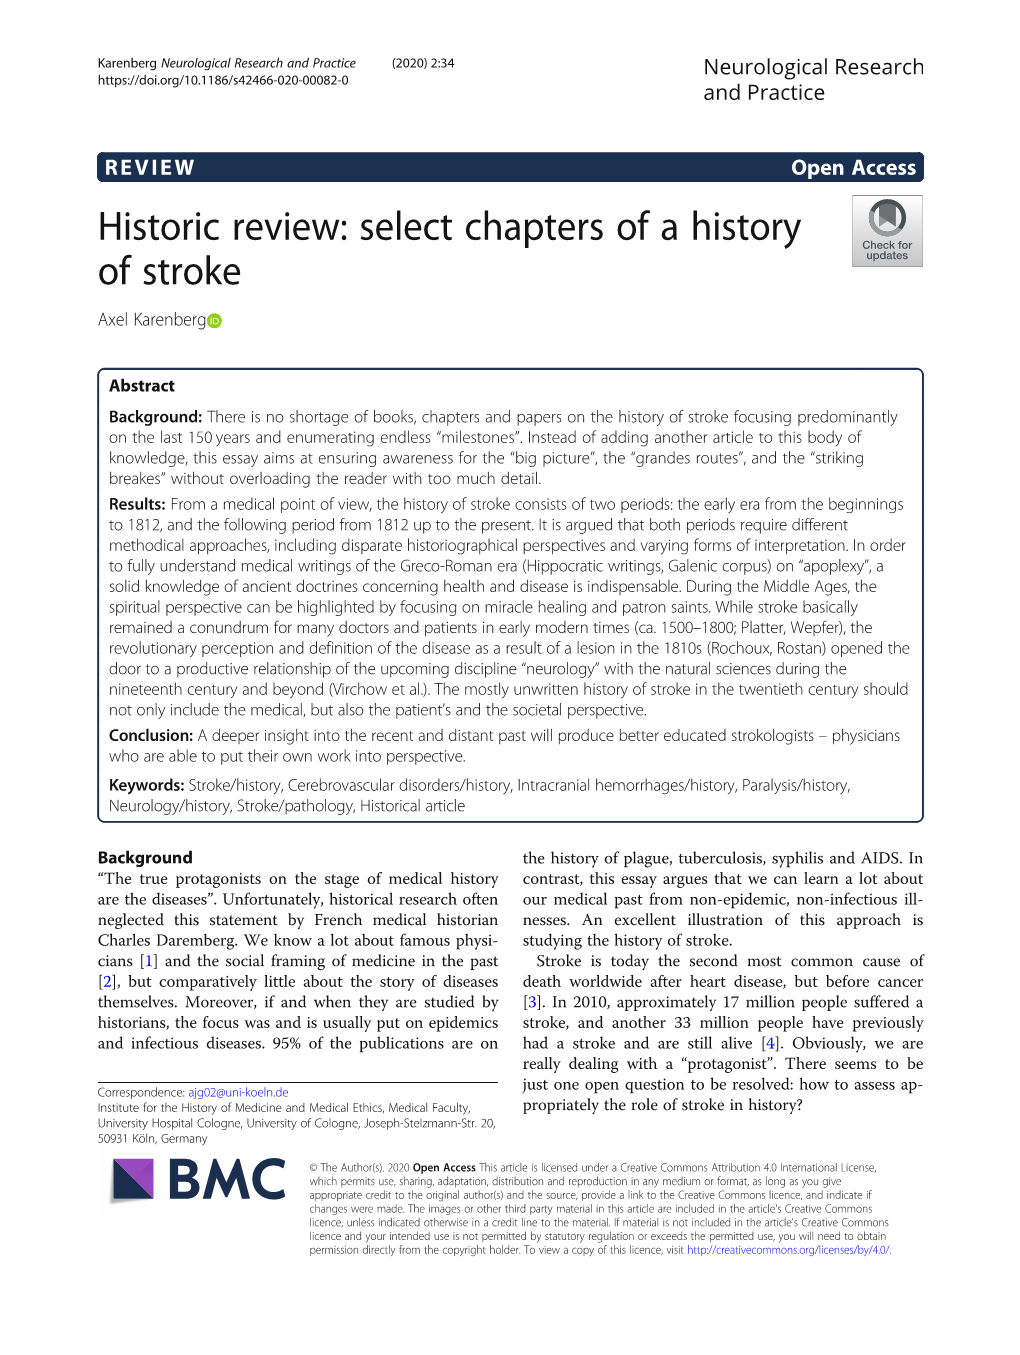 Historic Review: Select Chapters of a History of Stroke Axel Karenberg